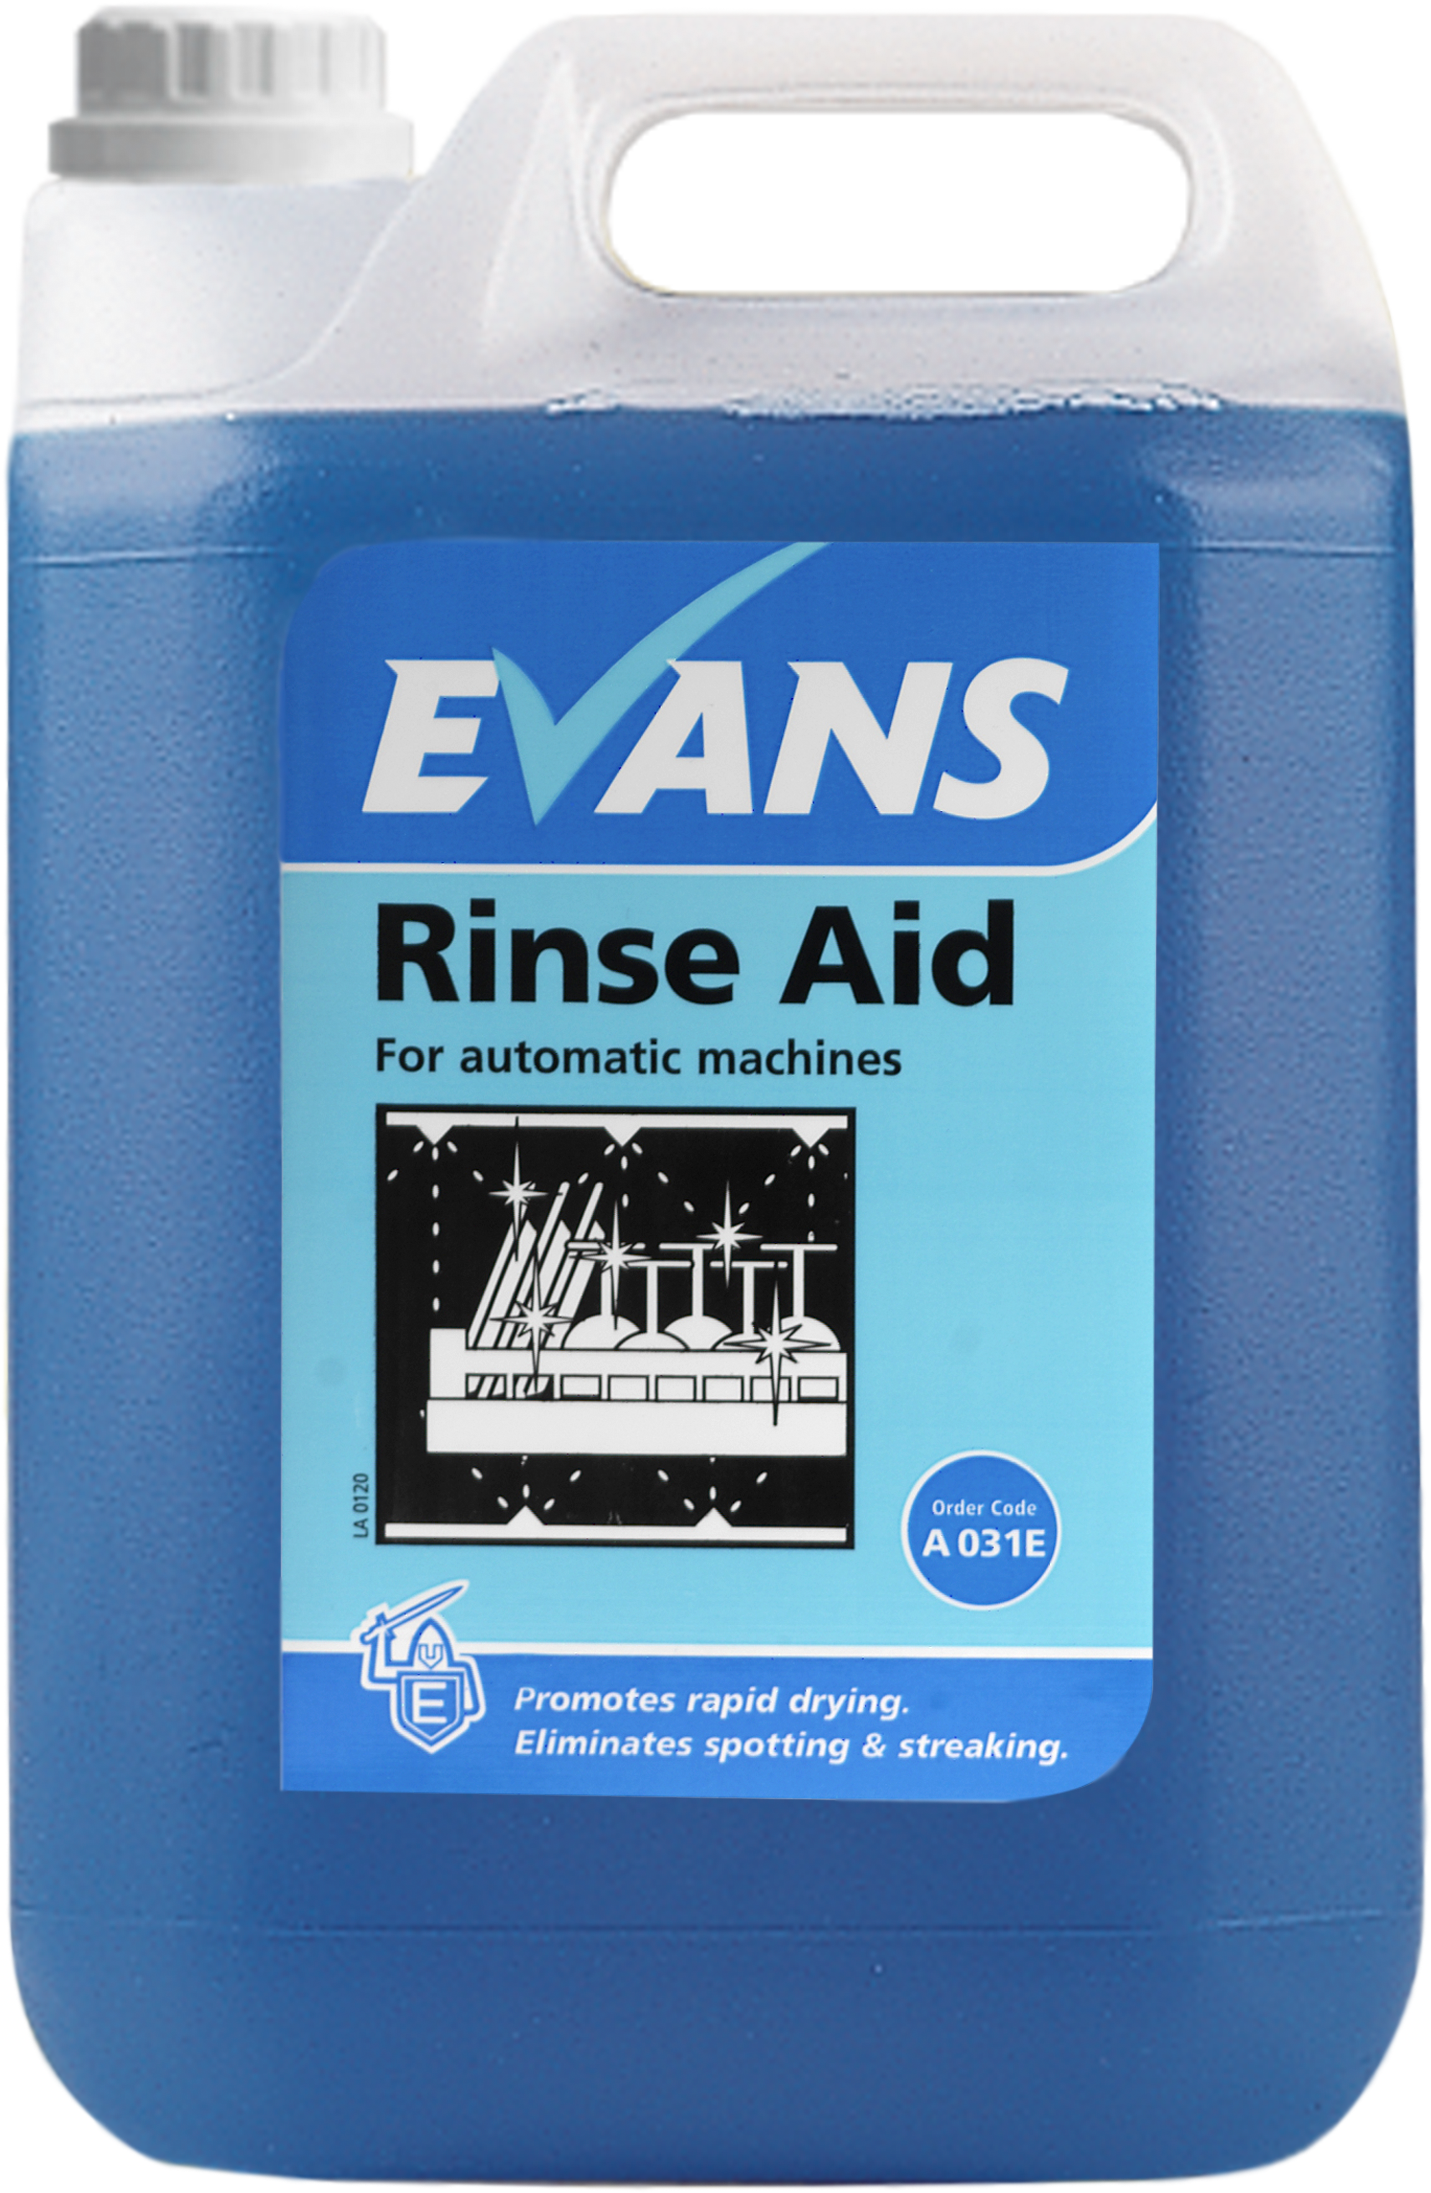 Evans Rinse Aid - For Automatic Machines 5 Ltr